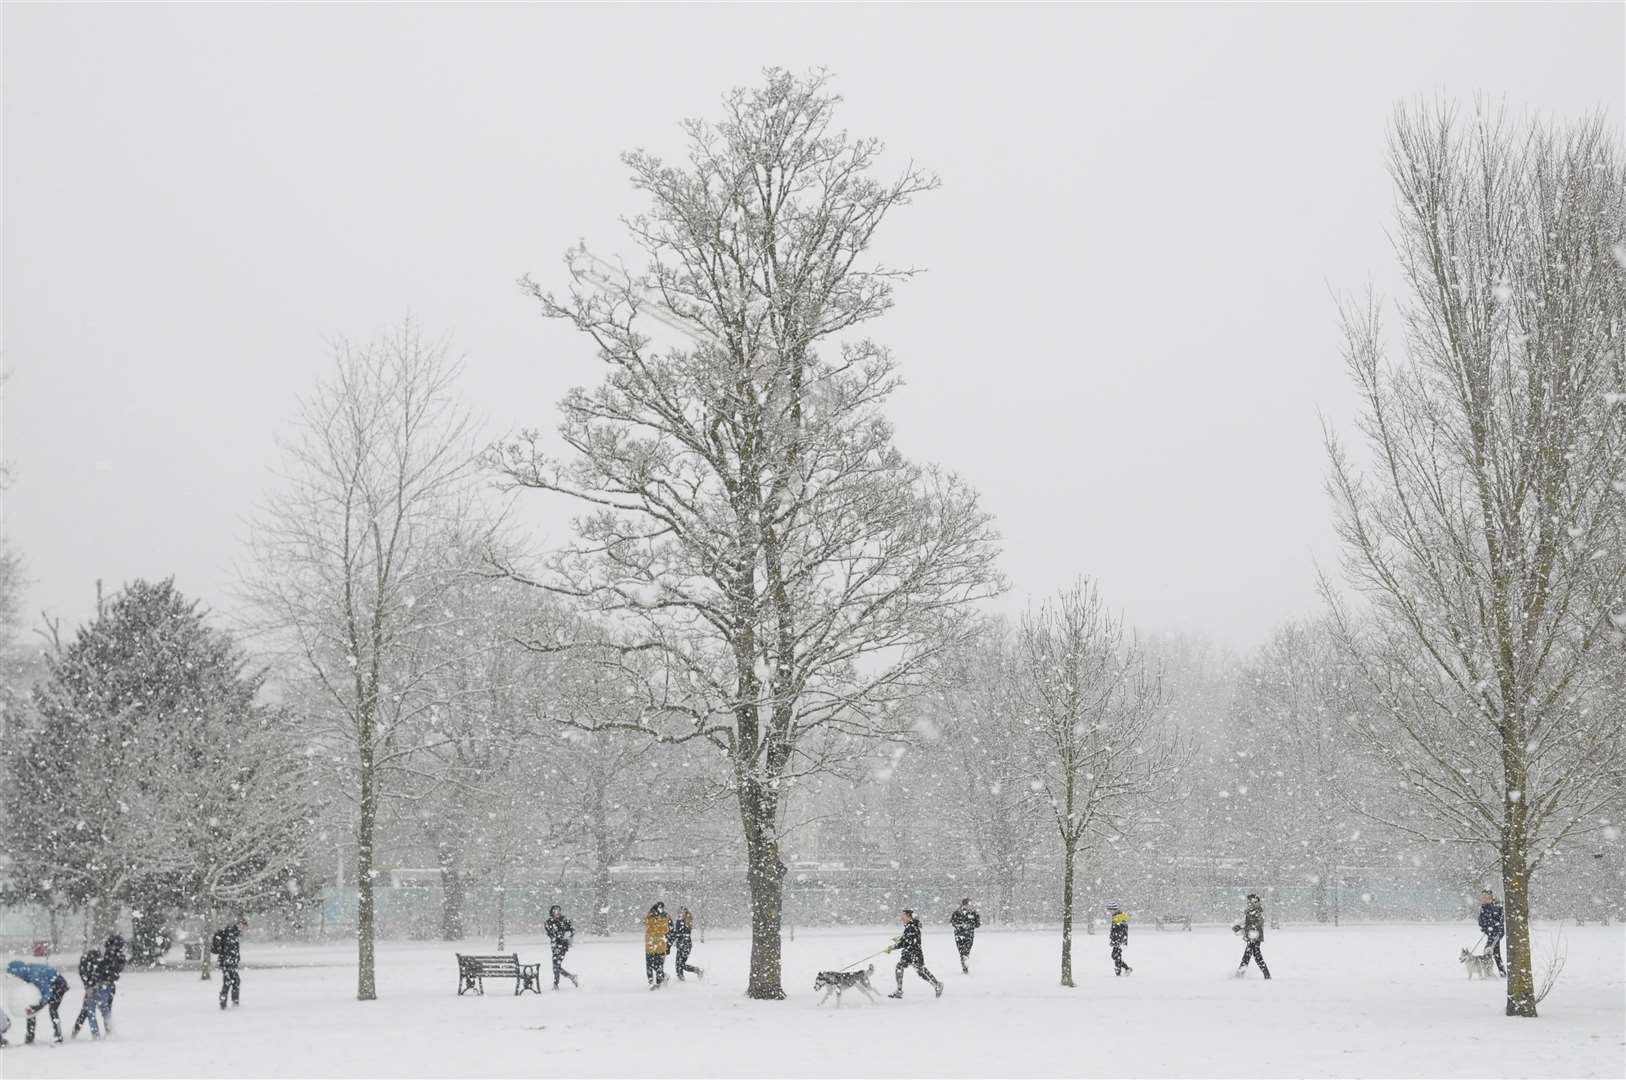 Snowy scenes in Victoria Park, Ashford, when the Beast from the East hit earlier this year